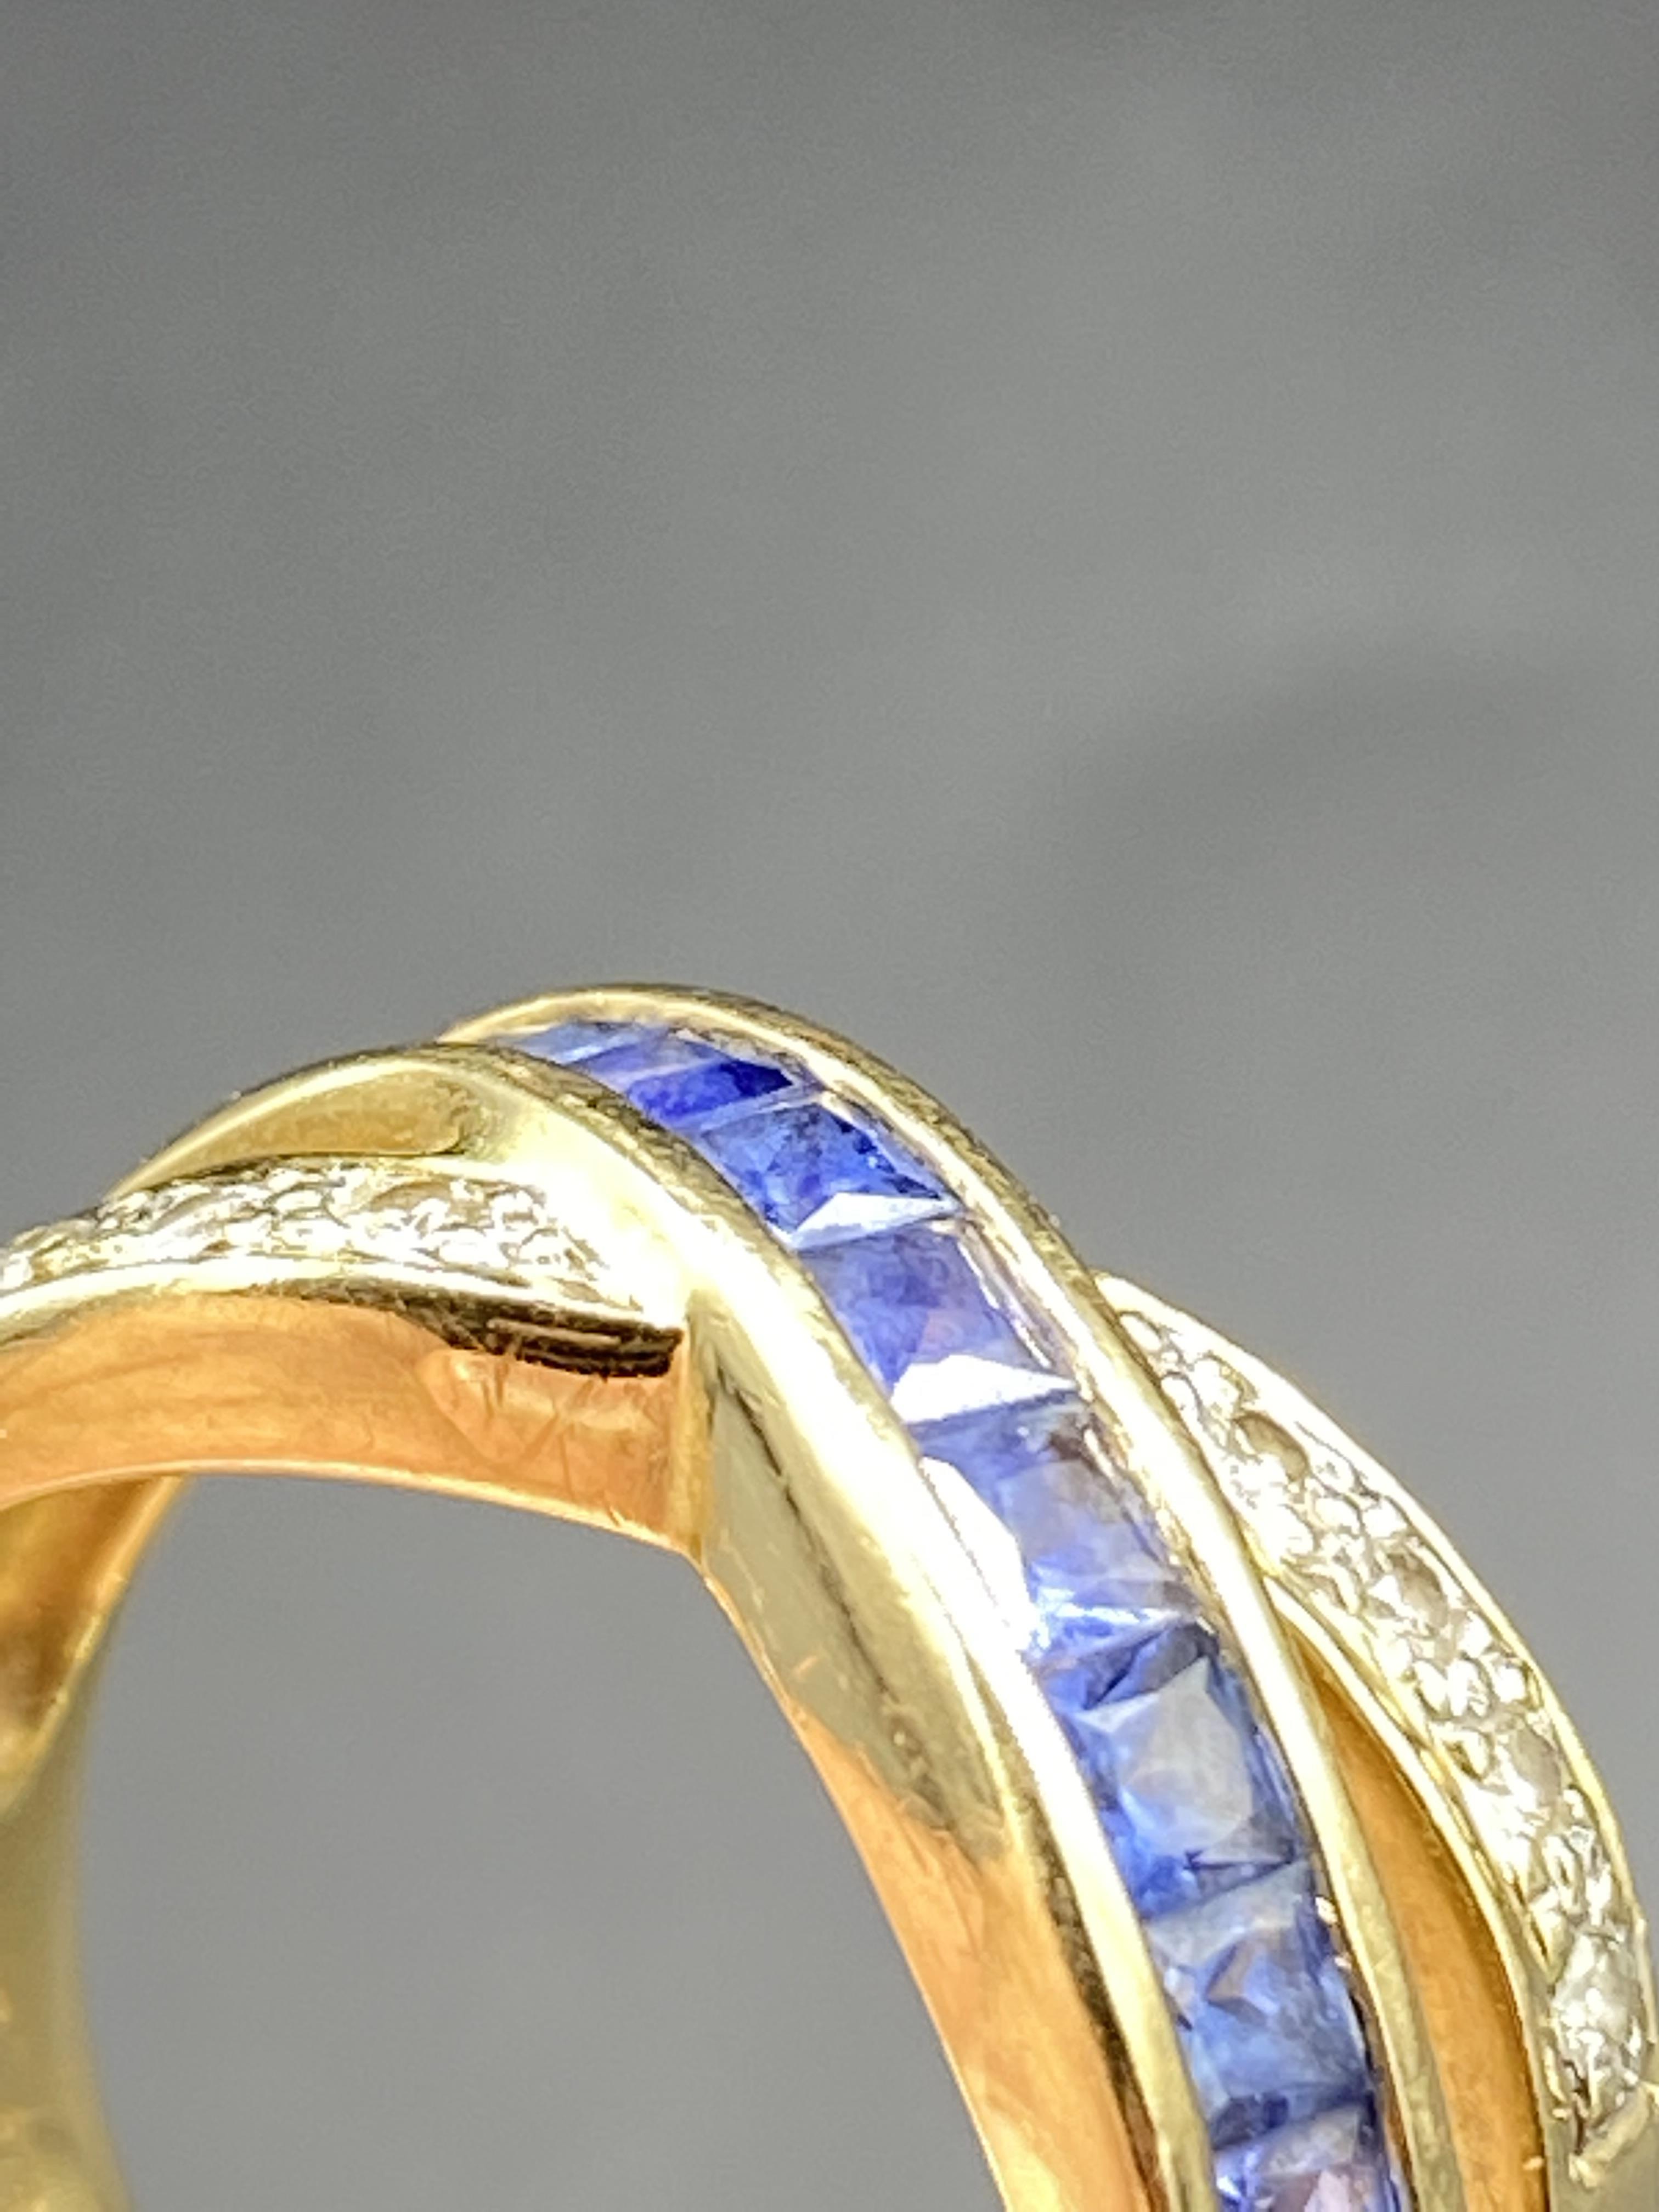 14ct gold, sapphire and diamond ring - Image 5 of 5